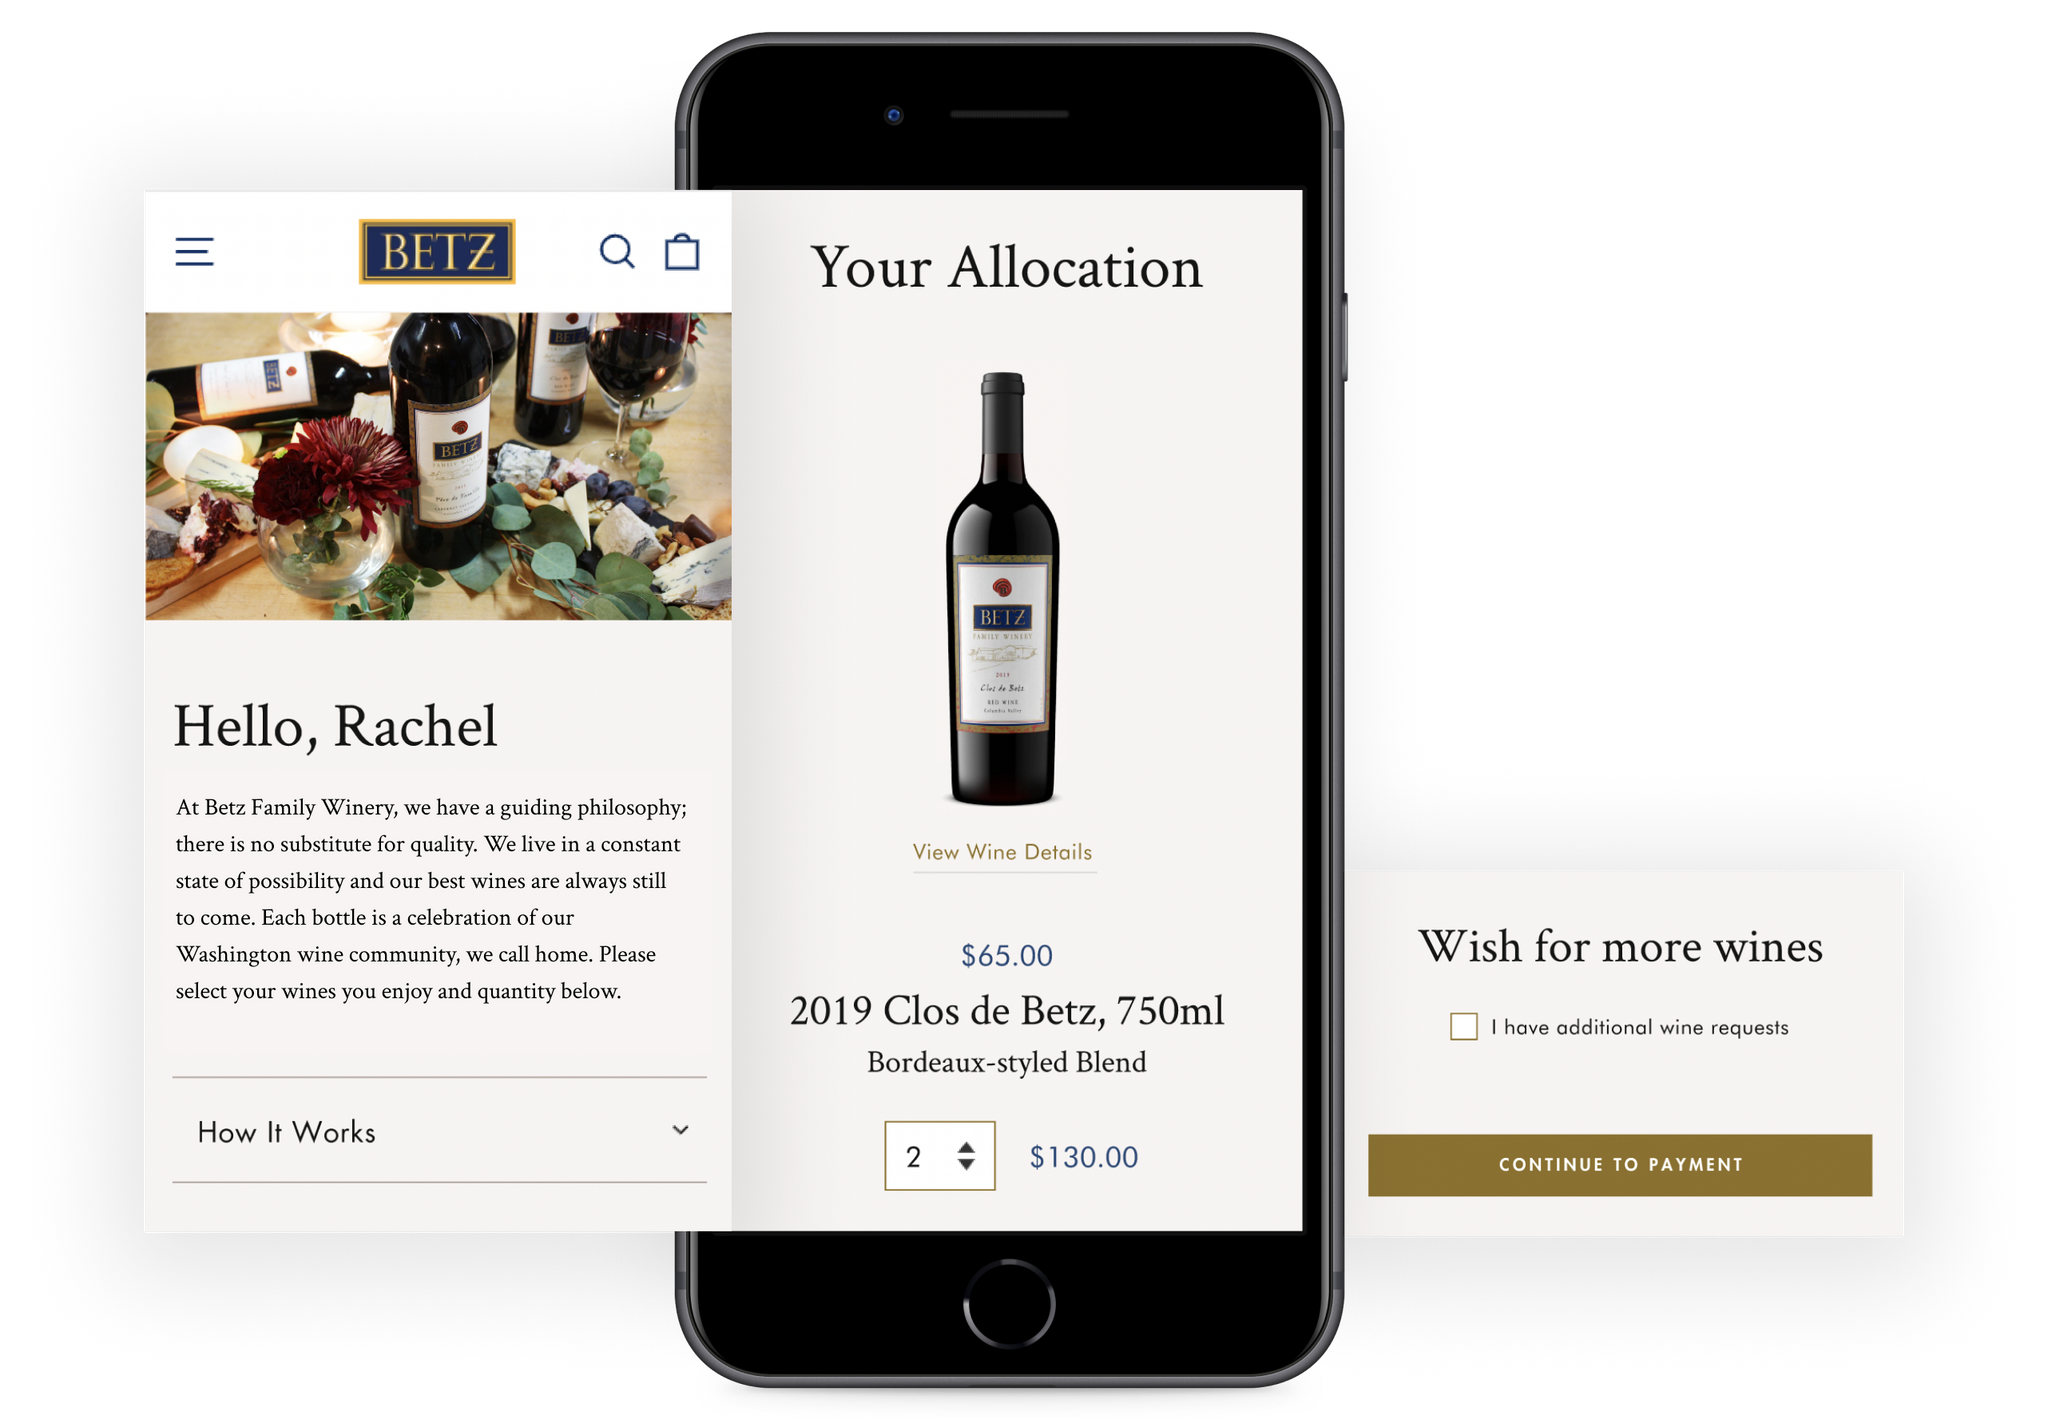 Betz wine allocation view for members customizing their selections and wishing for more in a mobile phone.